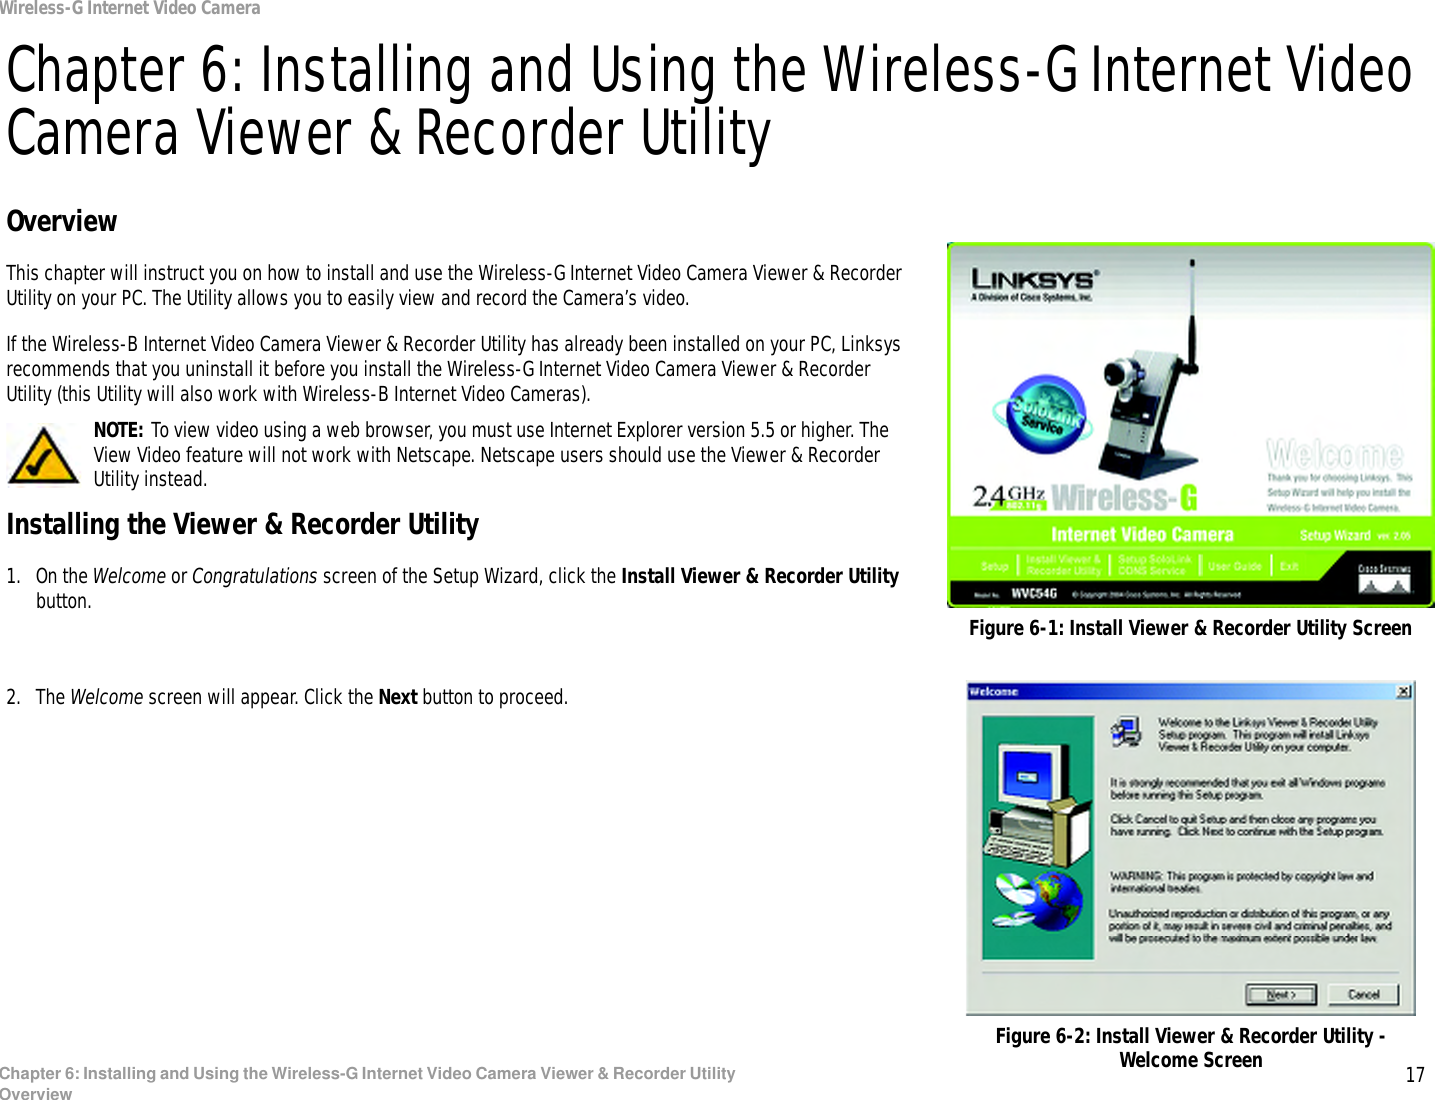 17Chapter 6: Installing and Using the Wireless-G Internet Video Camera Viewer &amp; Recorder UtilityOverviewWireless-G Internet Video CameraChapter 6: Installing and Using the Wireless-G Internet Video Camera Viewer &amp; Recorder UtilityOverviewThis chapter will instruct you on how to install and use the Wireless-G Internet Video Camera Viewer &amp; Recorder Utility on your PC. The Utility allows you to easily view and record the Camera’s video.If the Wireless-B Internet Video Camera Viewer &amp; Recorder Utility has already been installed on your PC, Linksys recommends that you uninstall it before you install the Wireless-G Internet Video Camera Viewer &amp; Recorder Utility (this Utility will also work with Wireless-B Internet Video Cameras).Installing the Viewer &amp; Recorder Utility1. On the Welcome or Congratulations screen of the Setup Wizard, click the Install Viewer &amp; Recorder Utility button.2. The Welcome screen will appear. Click the Next button to proceed.Figure 6-1: Install Viewer &amp; Recorder Utility ScreenFigure 6-2: Install Viewer &amp; Recorder Utility - Welcome ScreenNOTE: To view video using a web browser, you must use Internet Explorer version 5.5 or higher. The View Video feature will not work with Netscape. Netscape users should use the Viewer &amp; Recorder Utility instead.